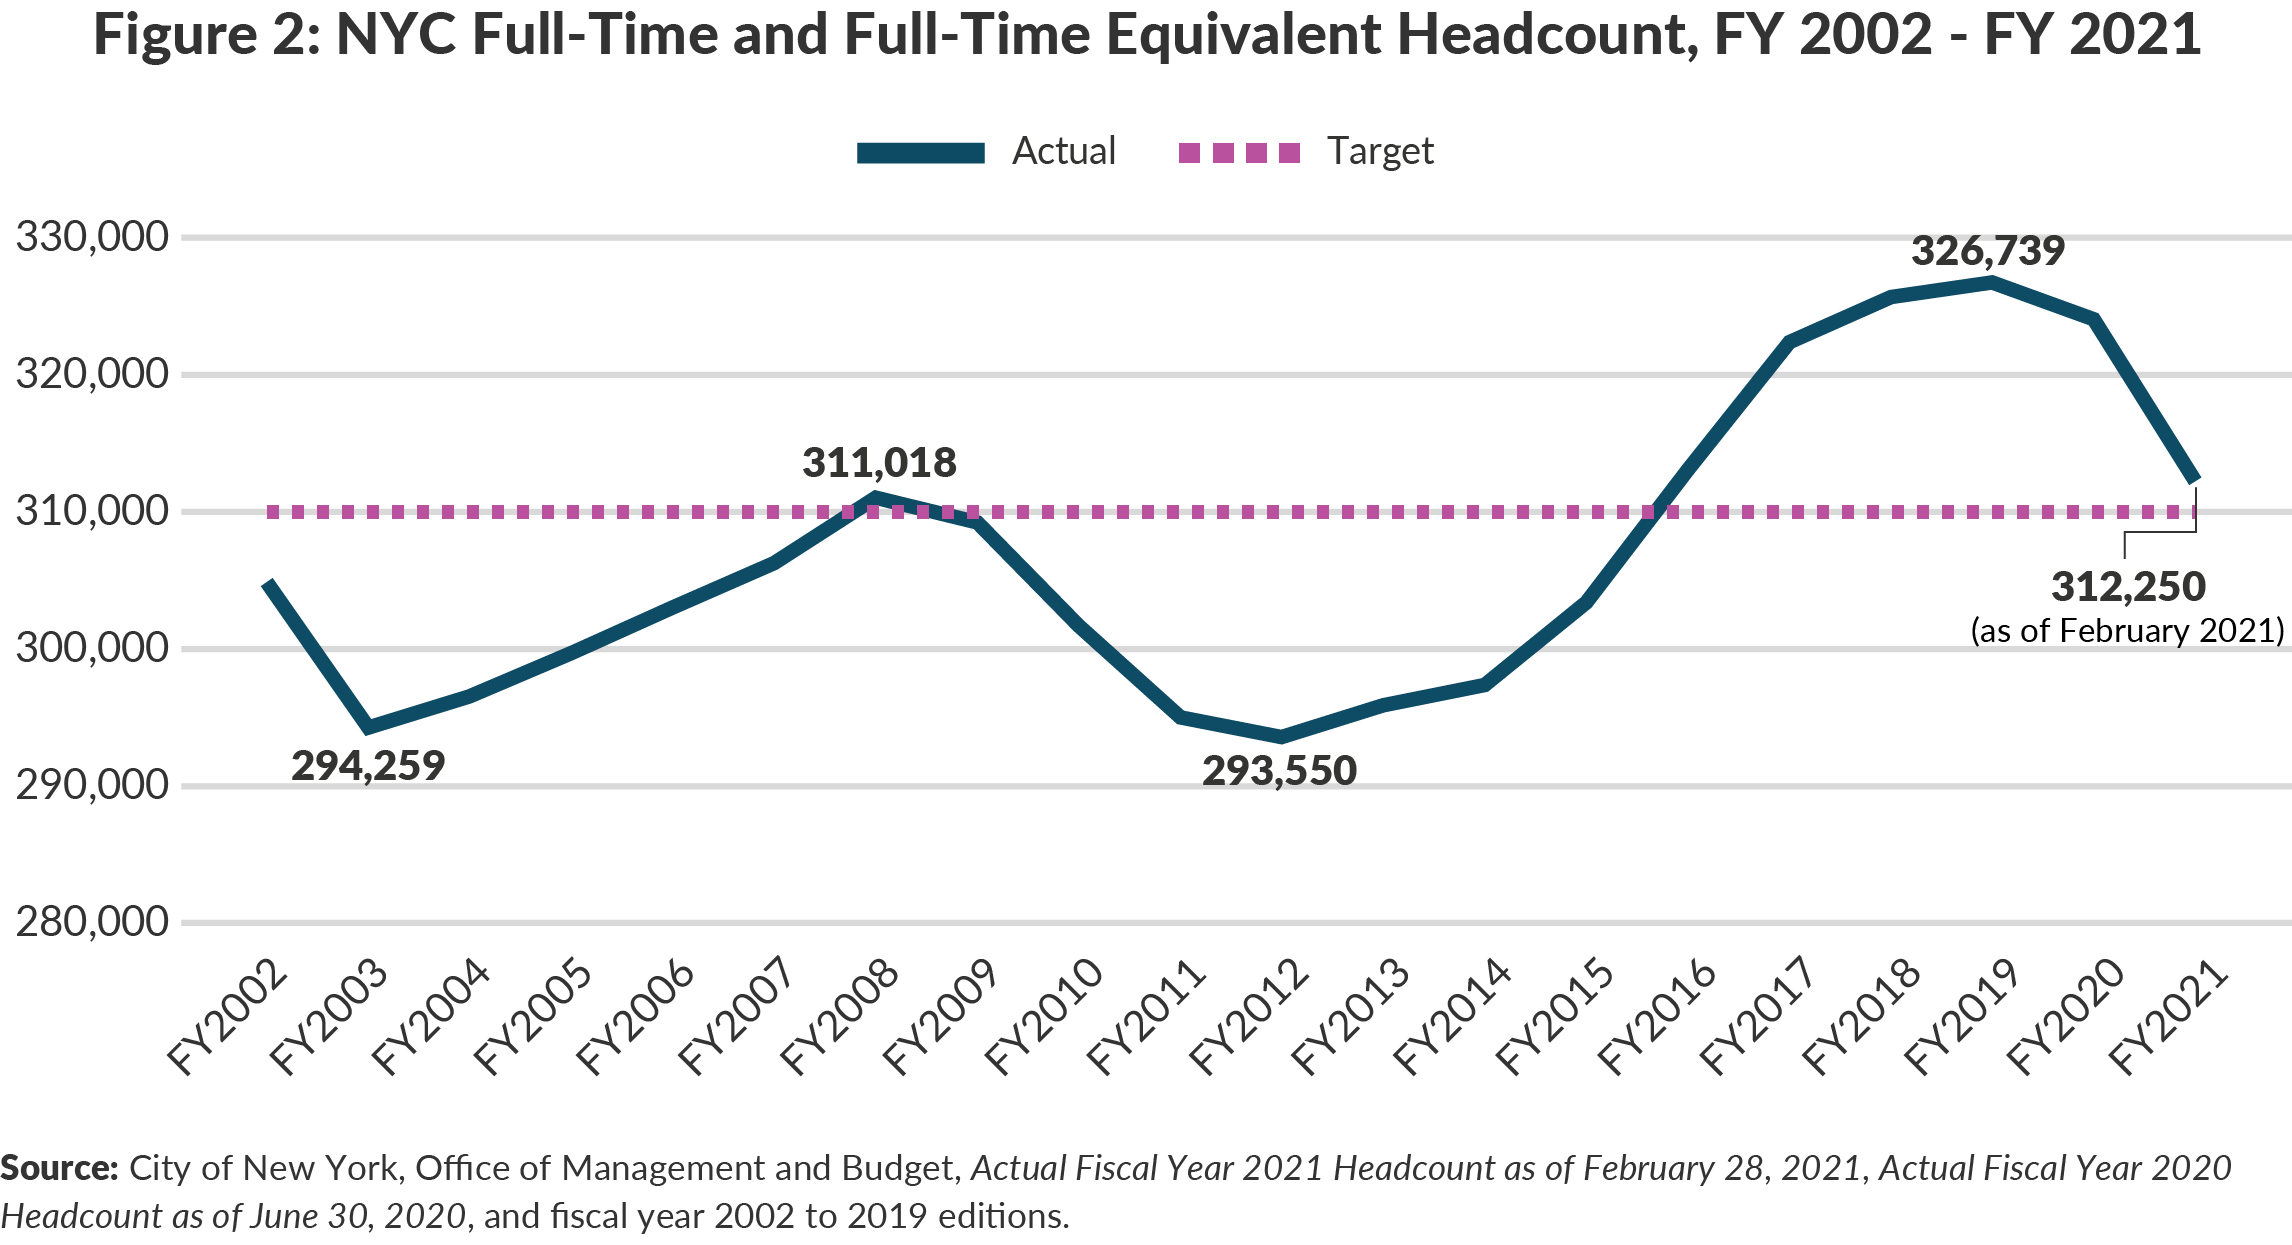 Figure 2: NYC Full-Time and Full-Time Equivalent Headcount,  FY 2002 - FY 2021